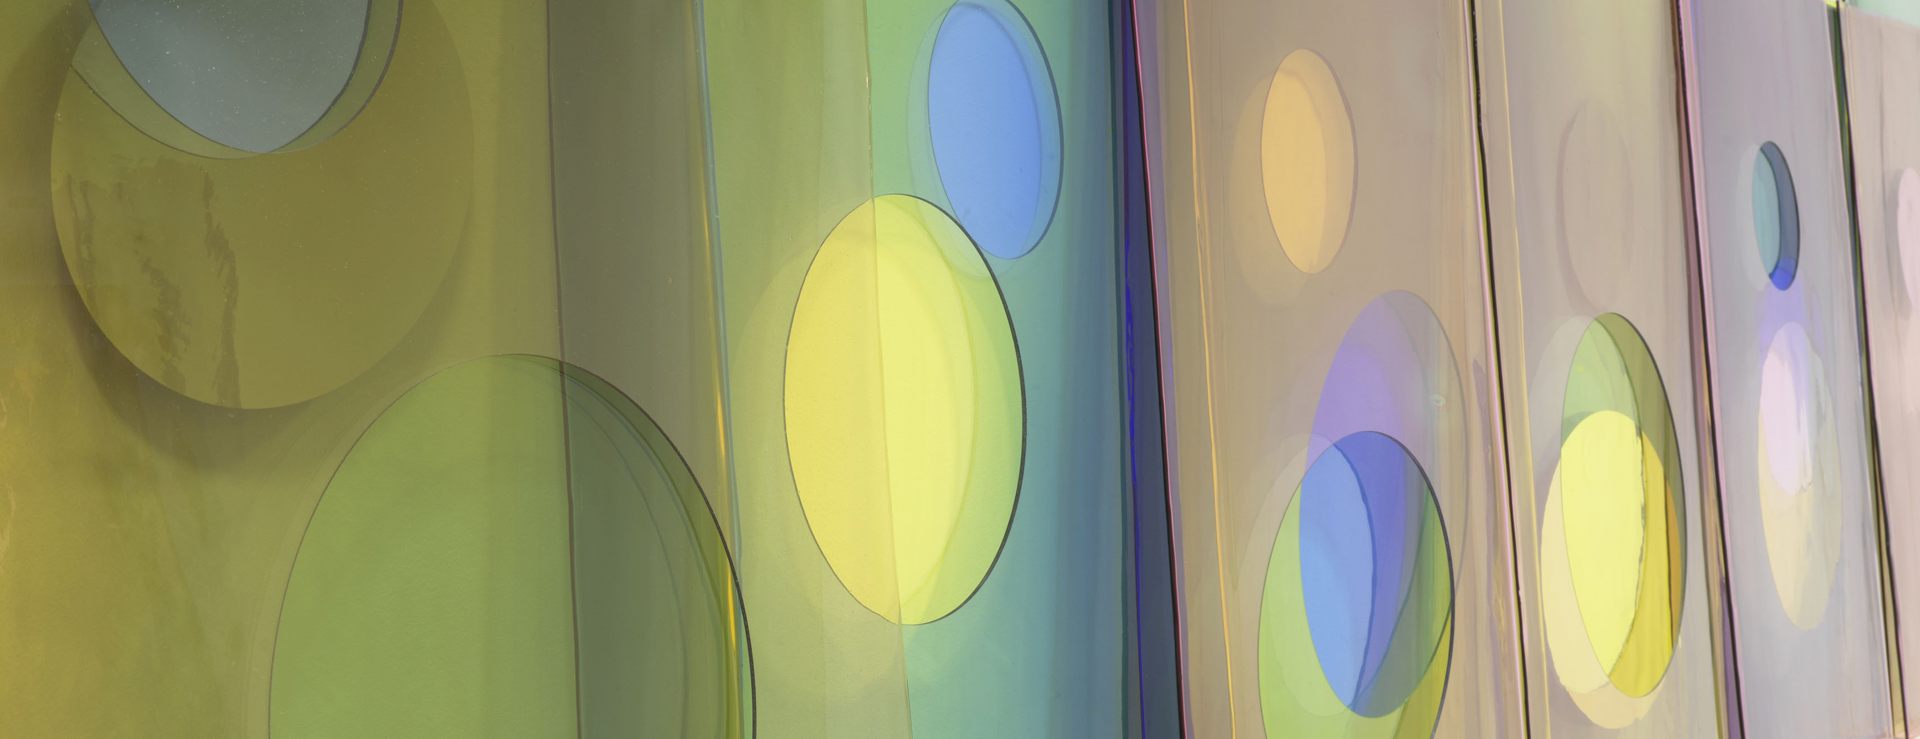 Olafur Eliasson’s upcoming exhibition at Istanbul Modern